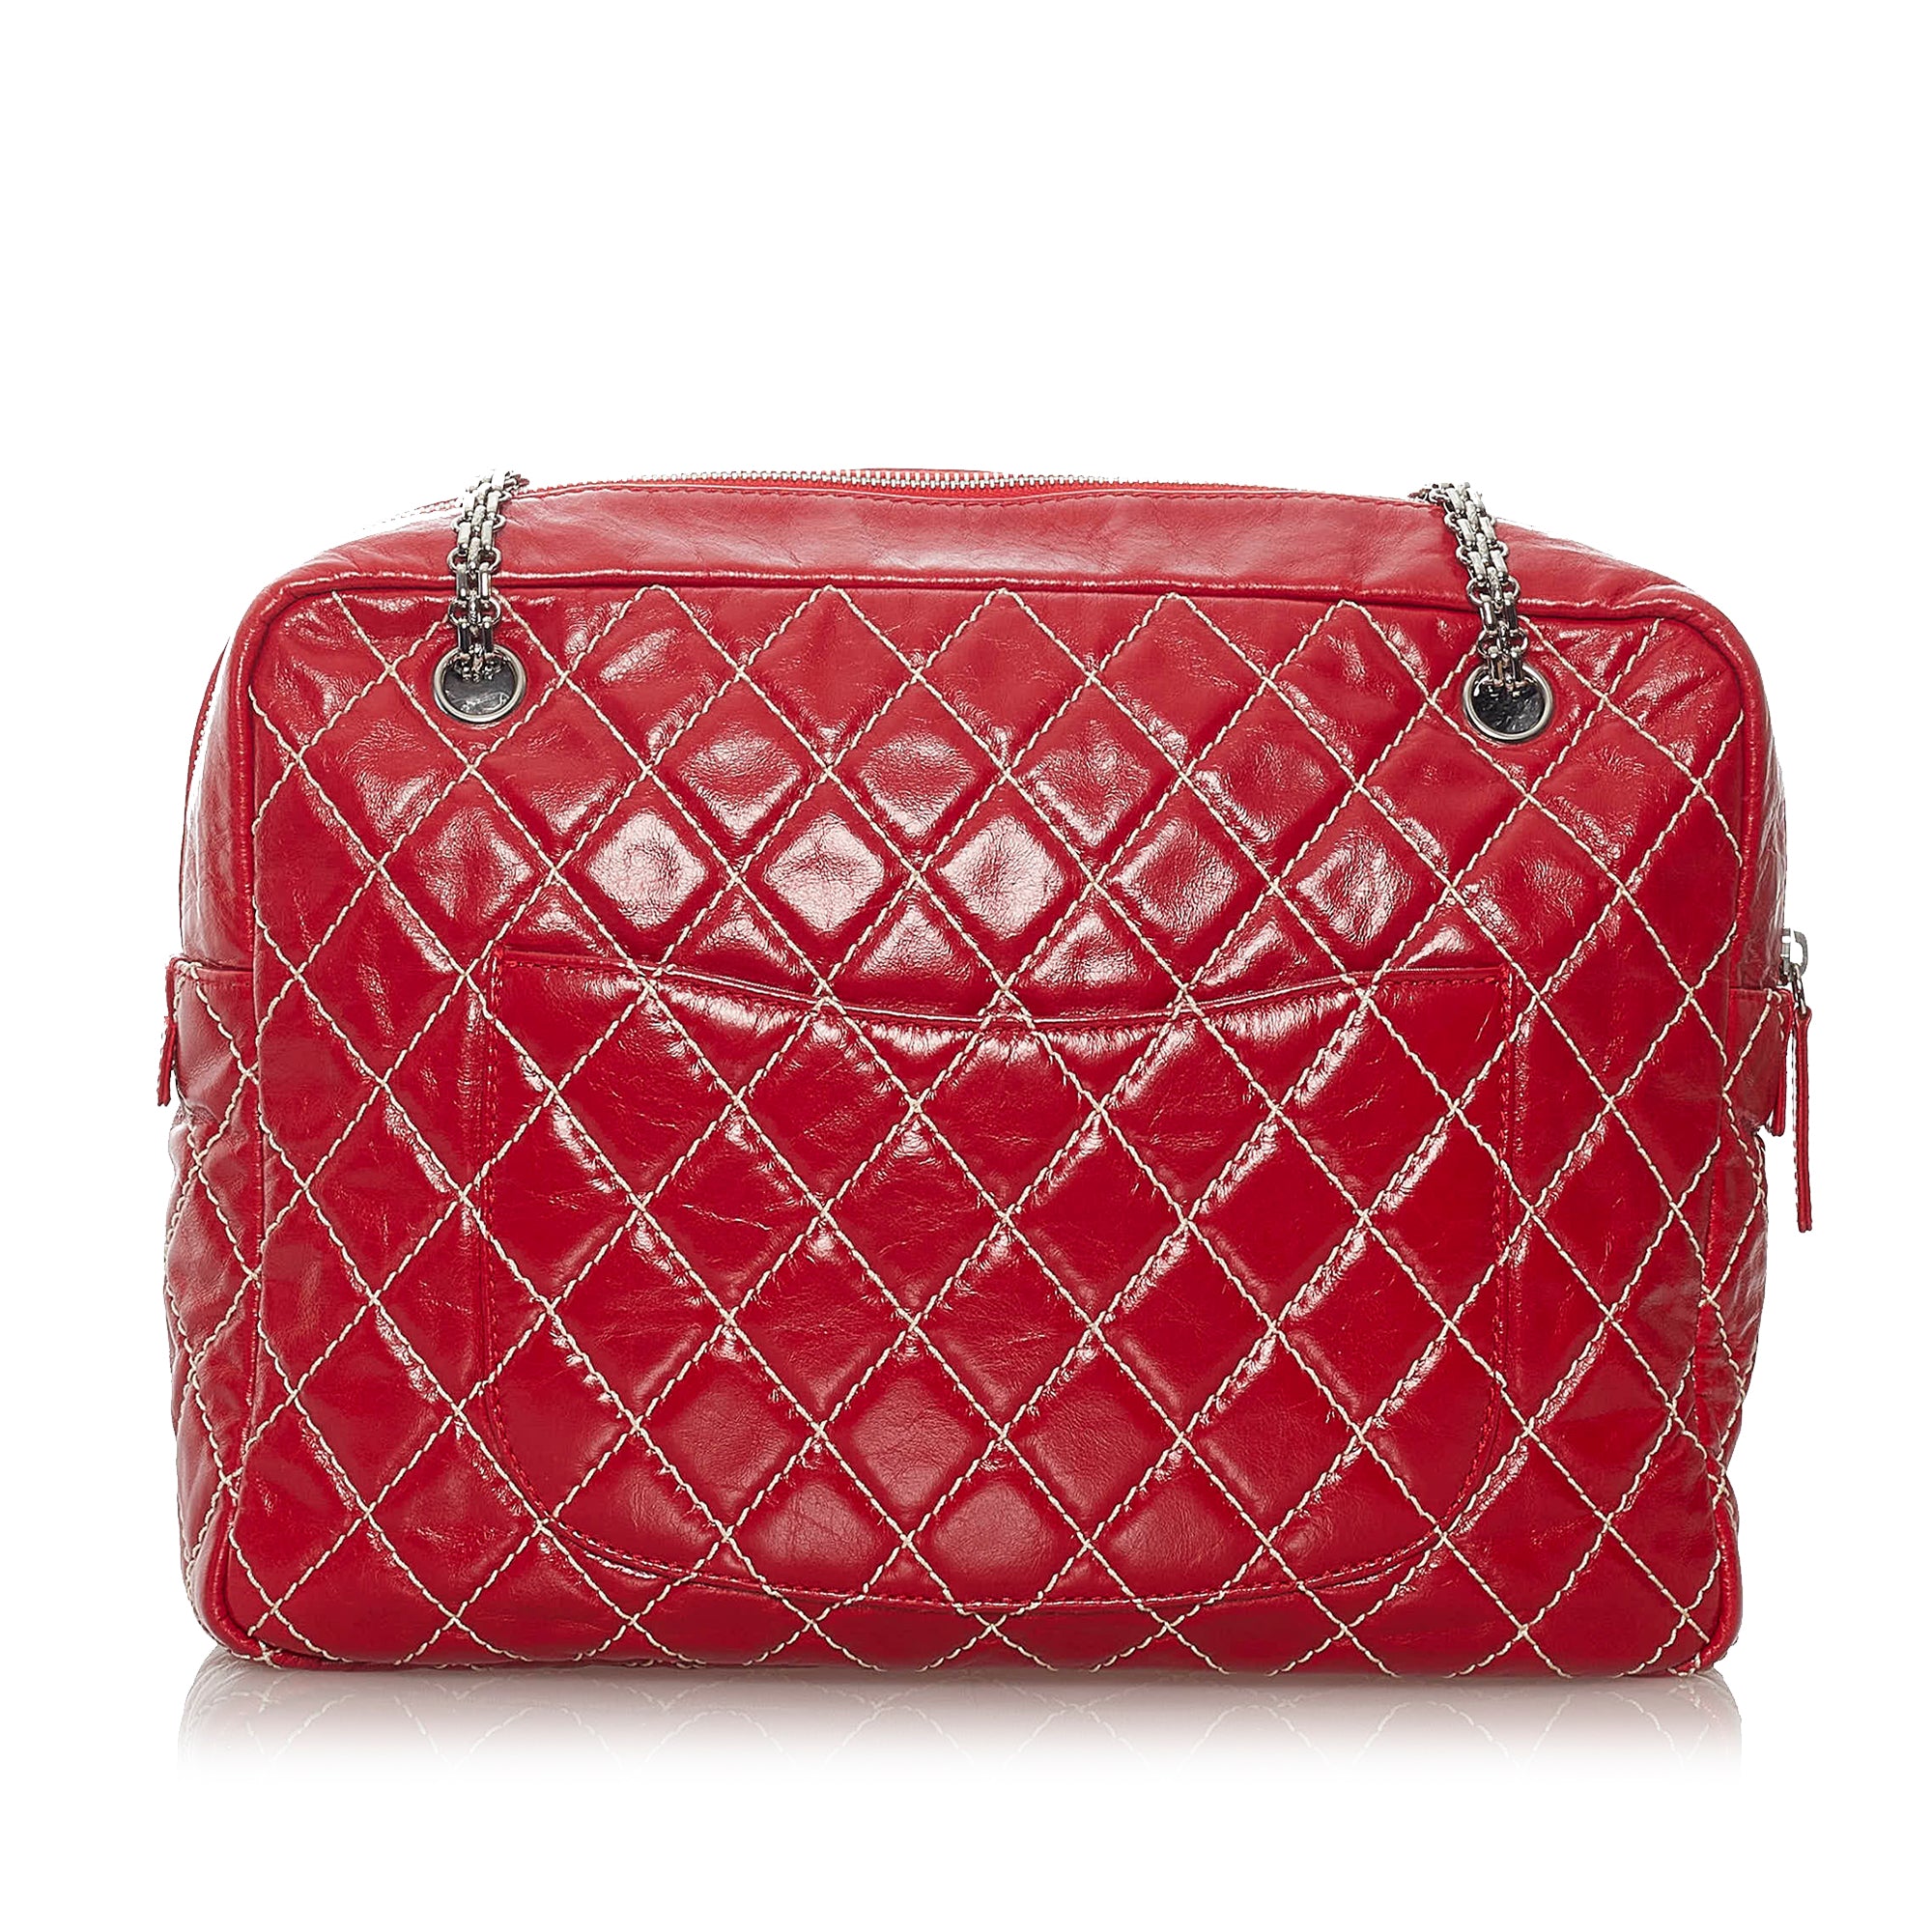 Mademoiselle bowling bag in pink leather